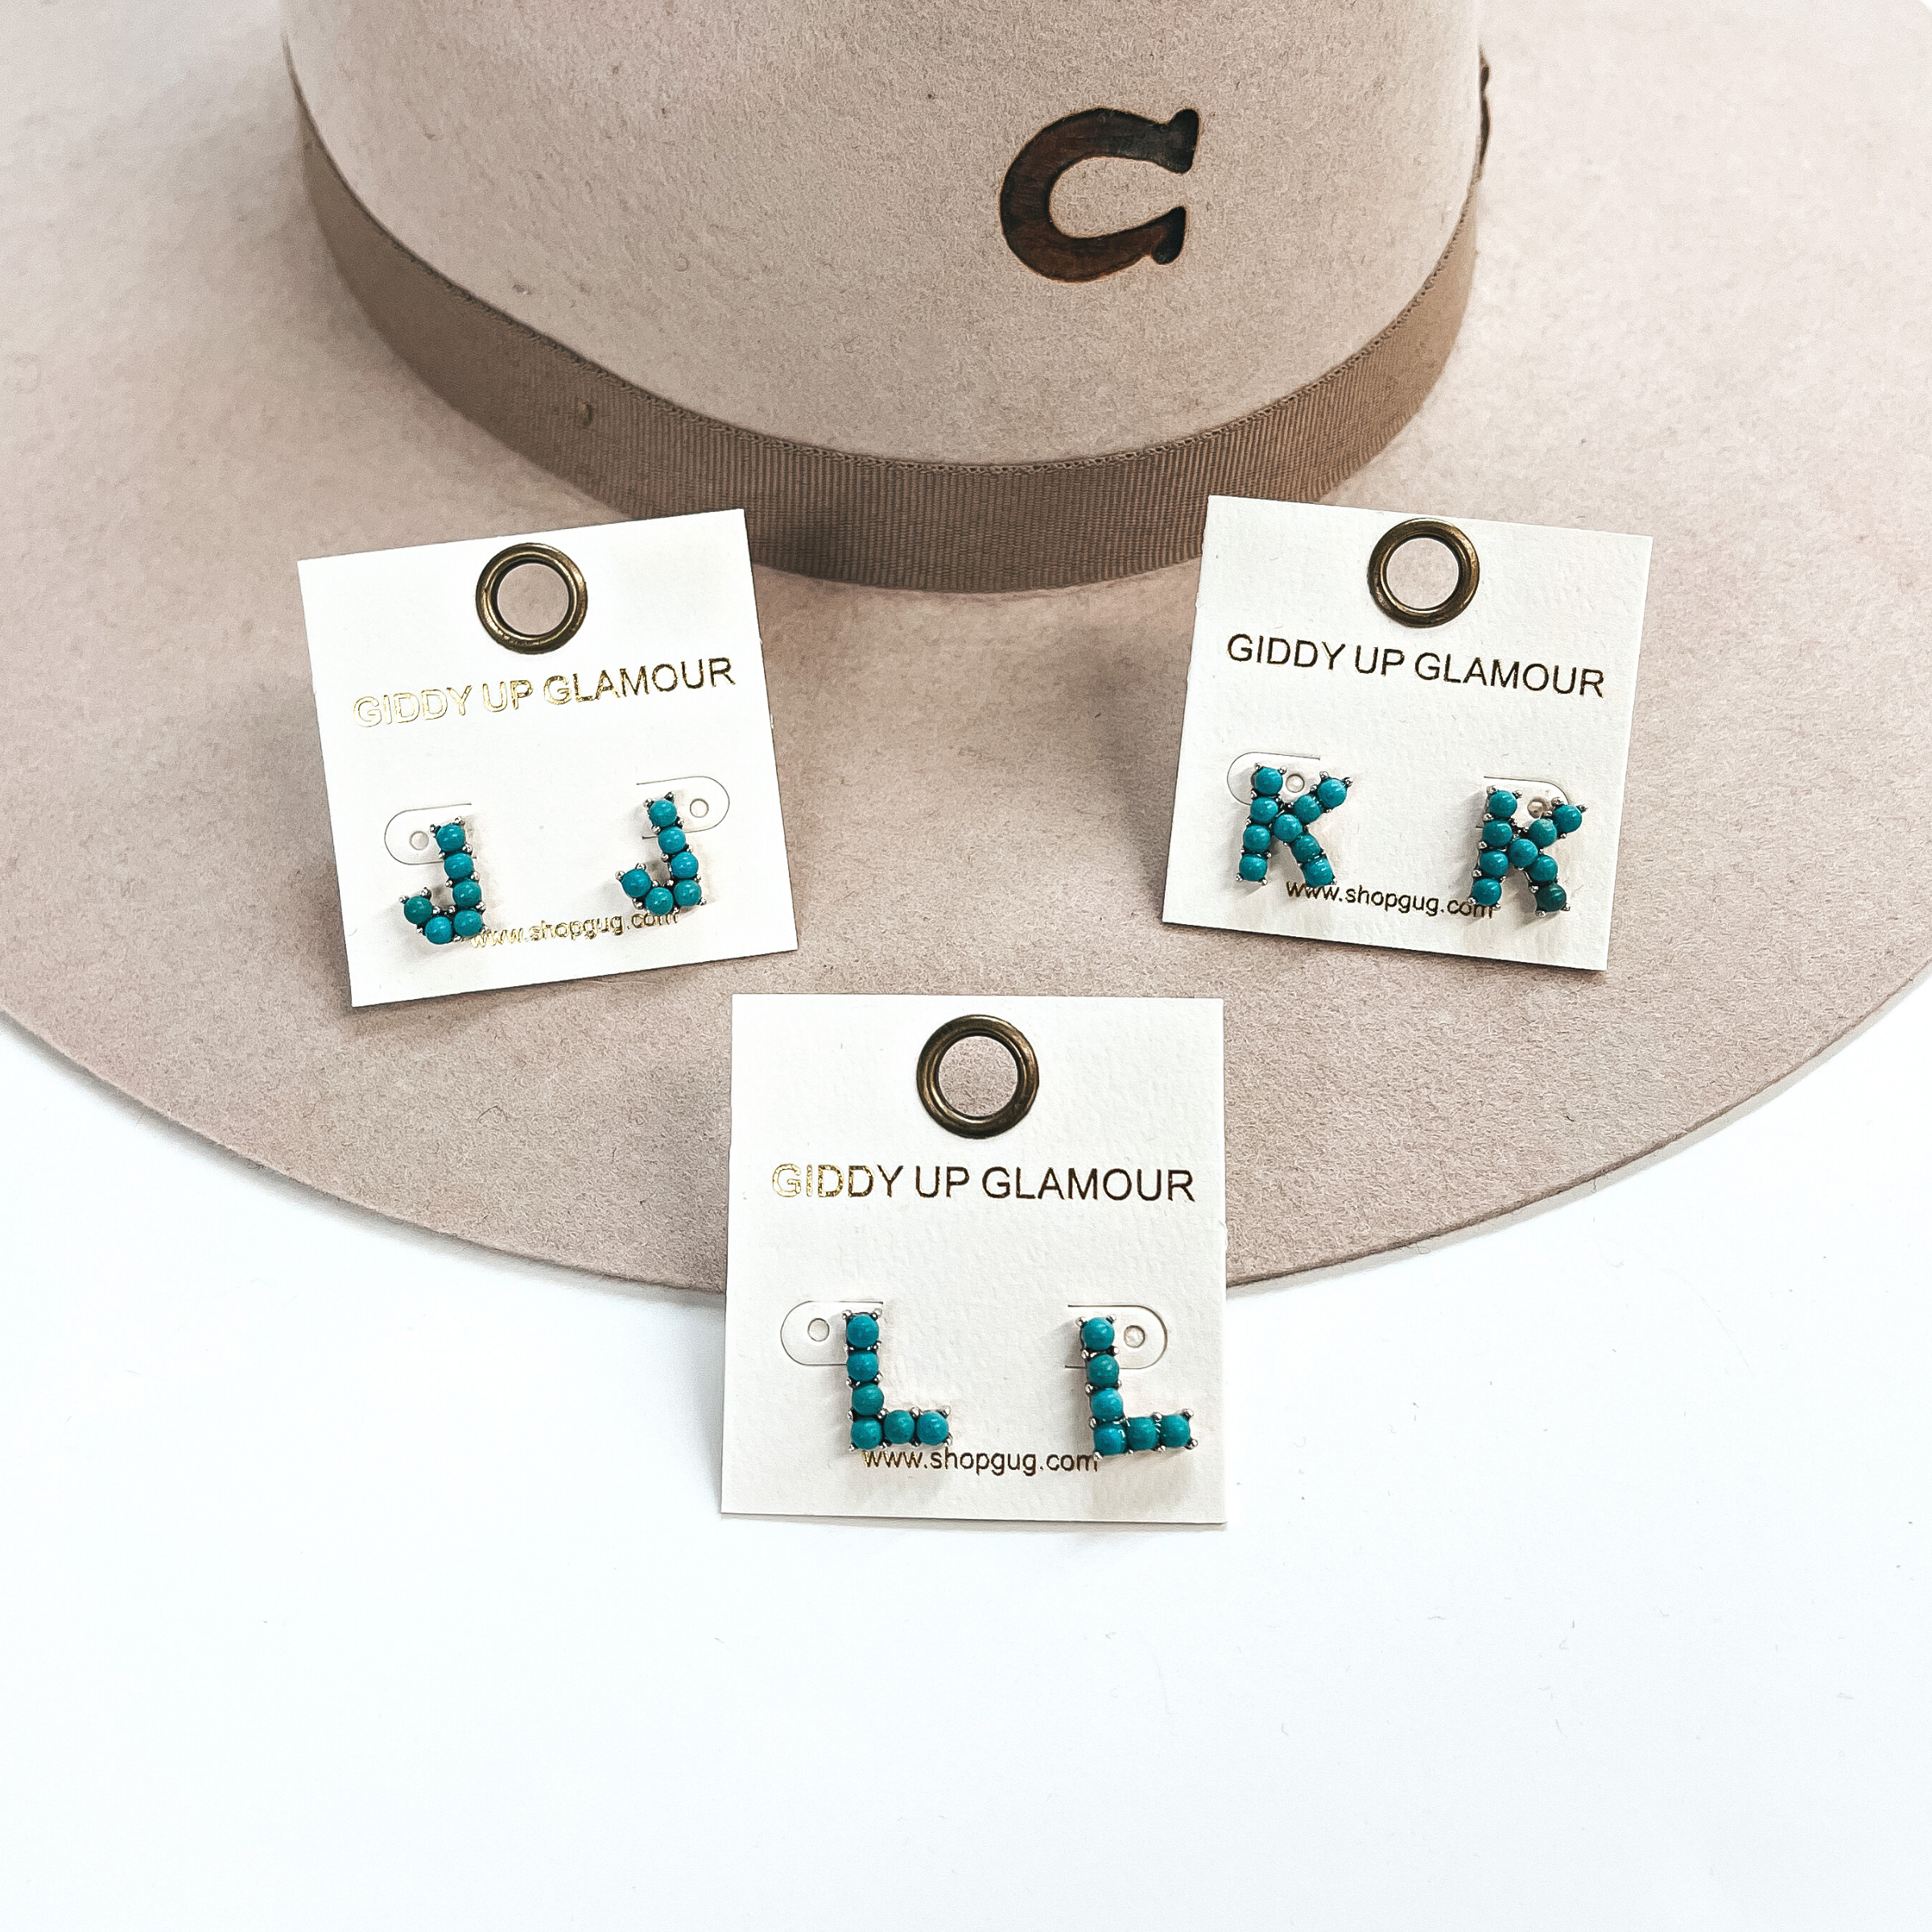 These are three pair of initial earrings with small turquoise stones in  a silver setting. From left to right; J,L,K. These earrings are placed  on a white Giddy Up Glamour card, they are laying on a beige, felt,  Charlie 1 Horse hat and on a white background.